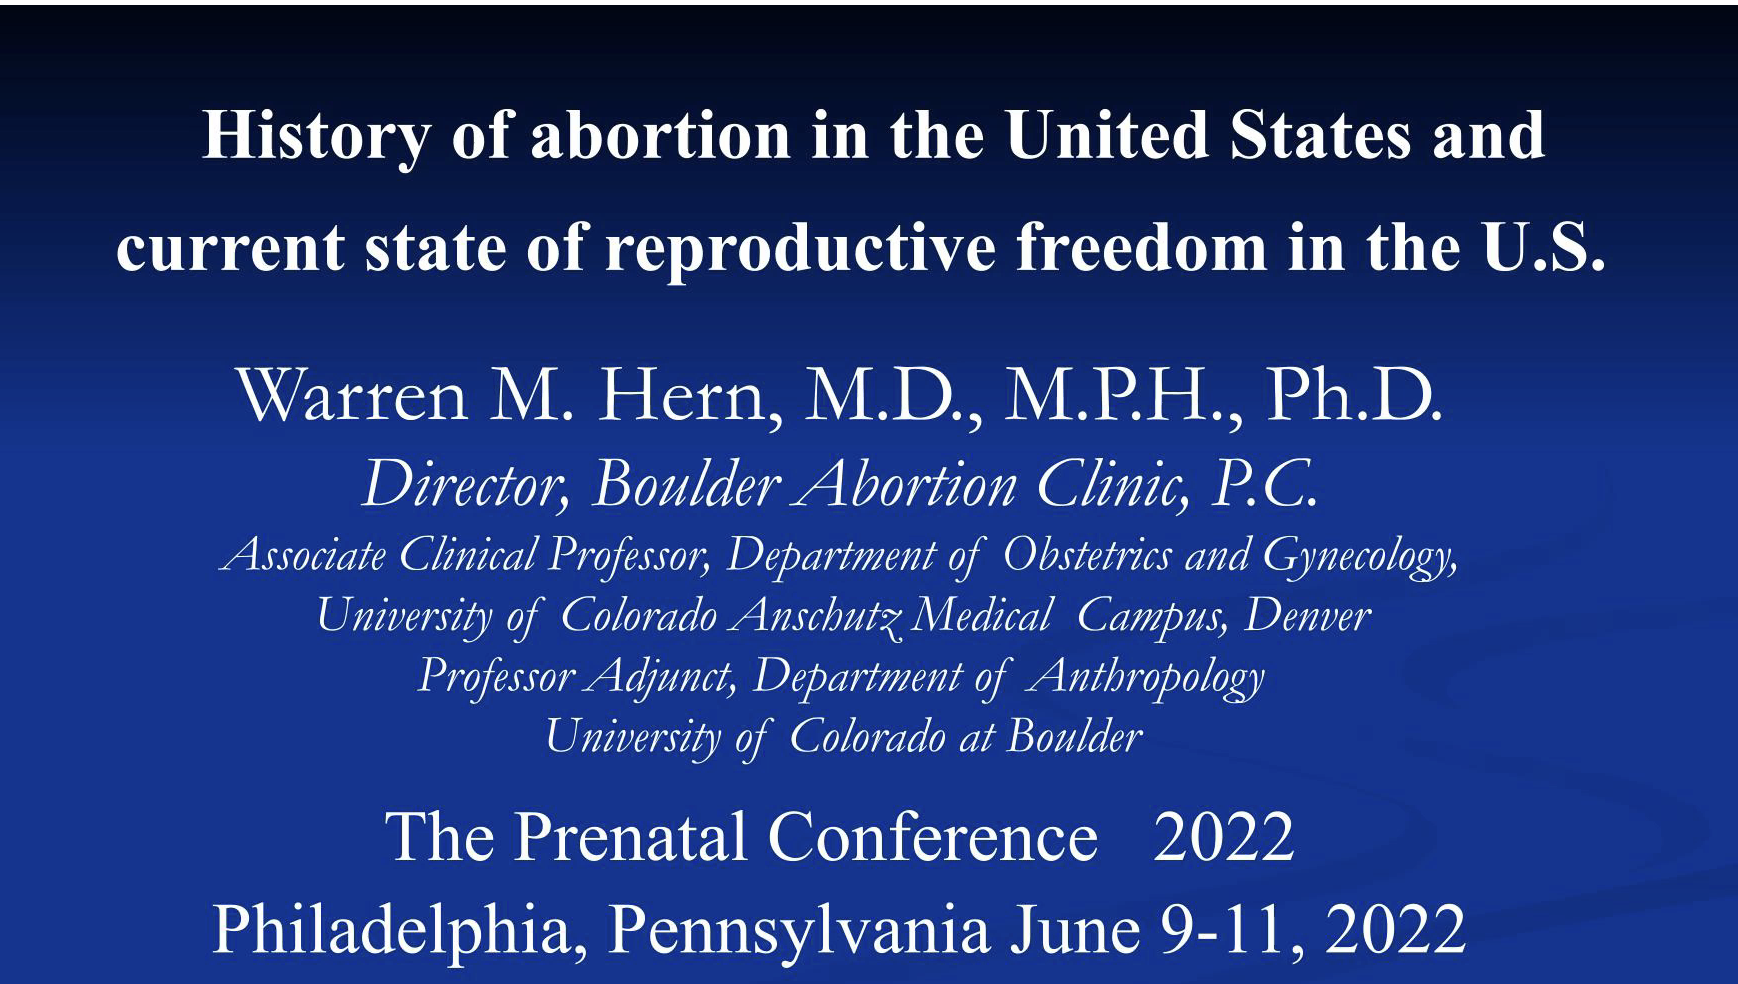 History of Abortion in the US video presentation by Warren Hern, MD